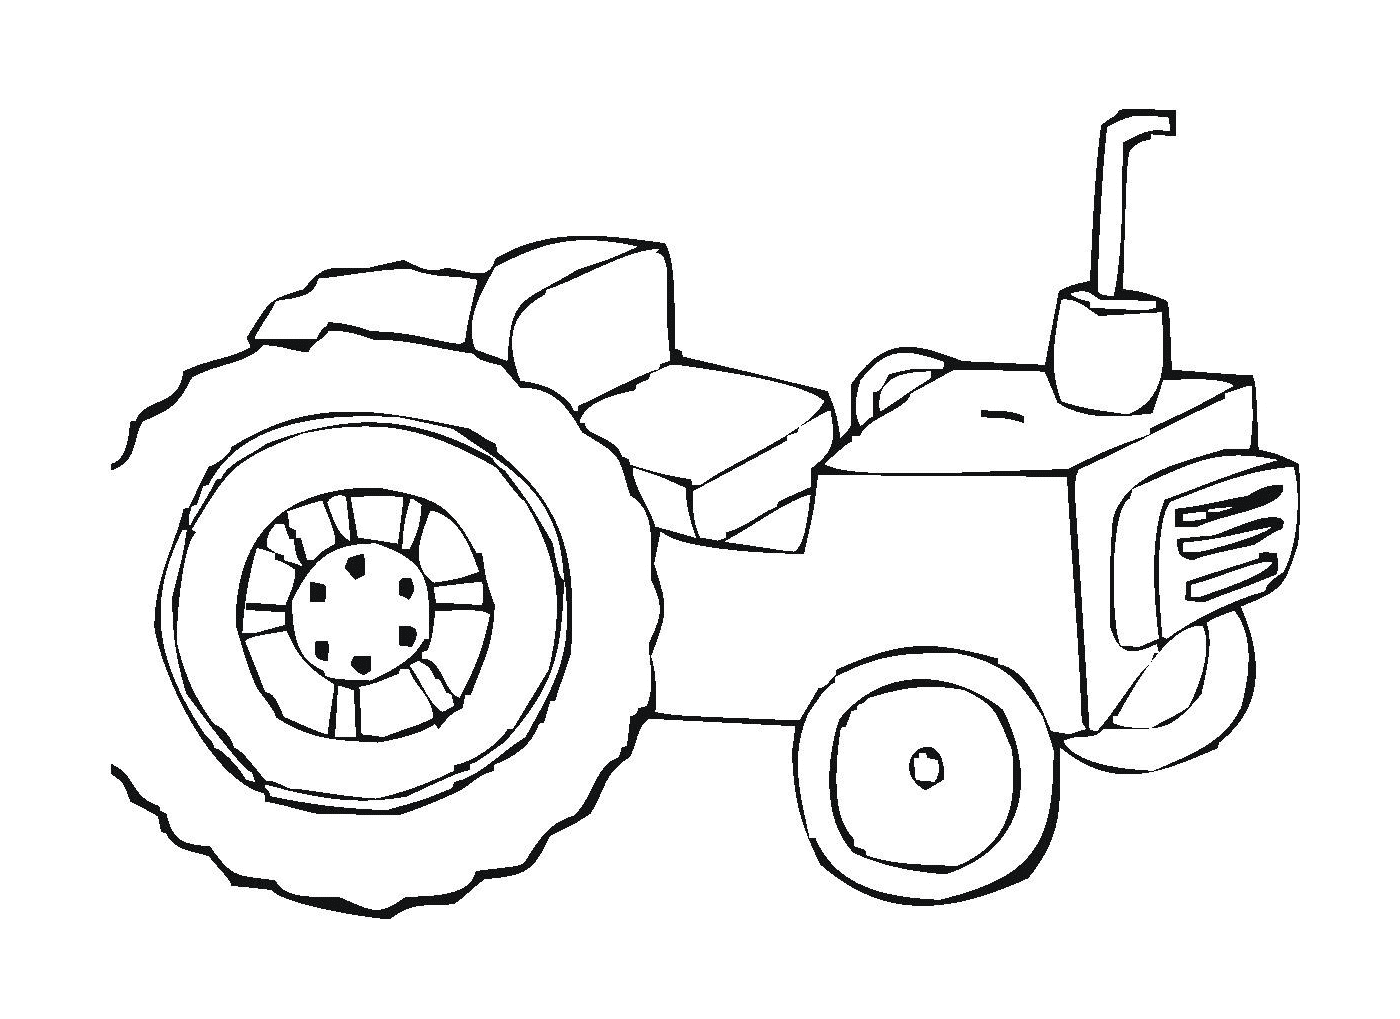  Old tractor drawn black 